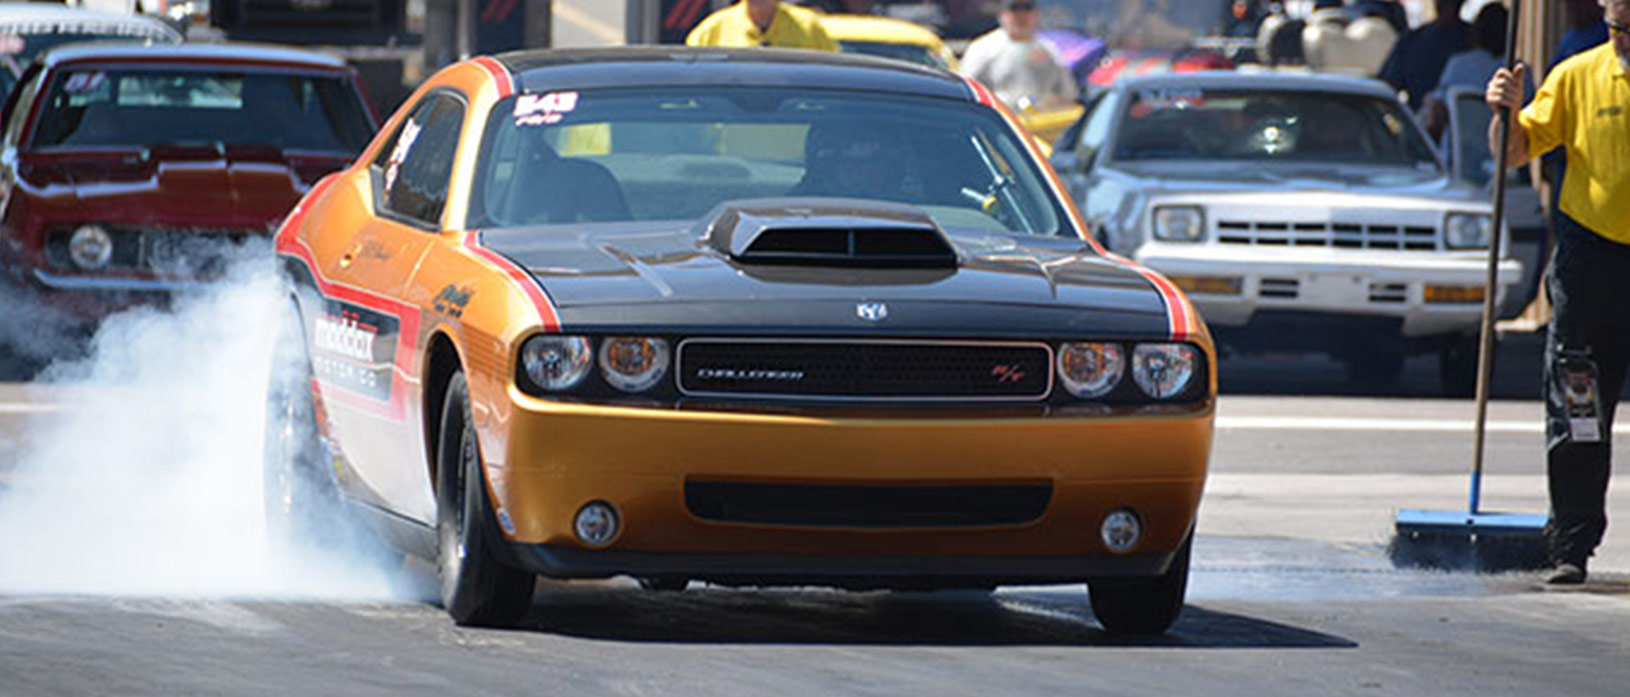 Sportsman Racers Get In On The Action at NHRA Dodge Mile-High Nationals